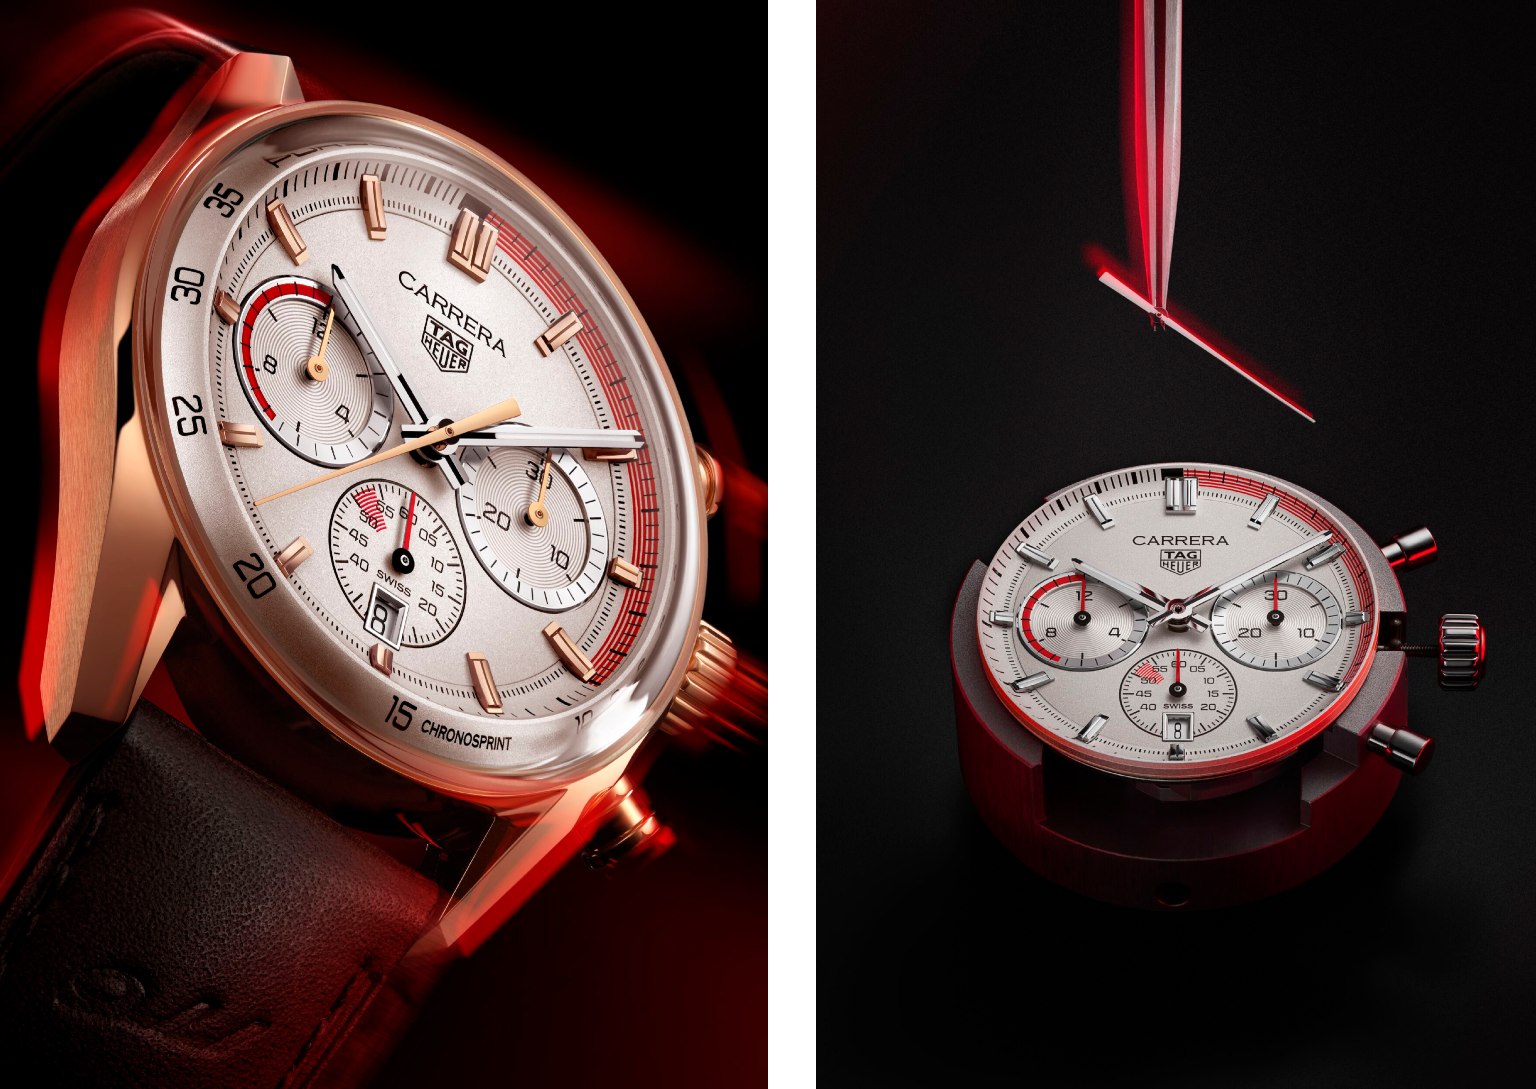 60 years of history and tradition meet with the Carrera Chronograph